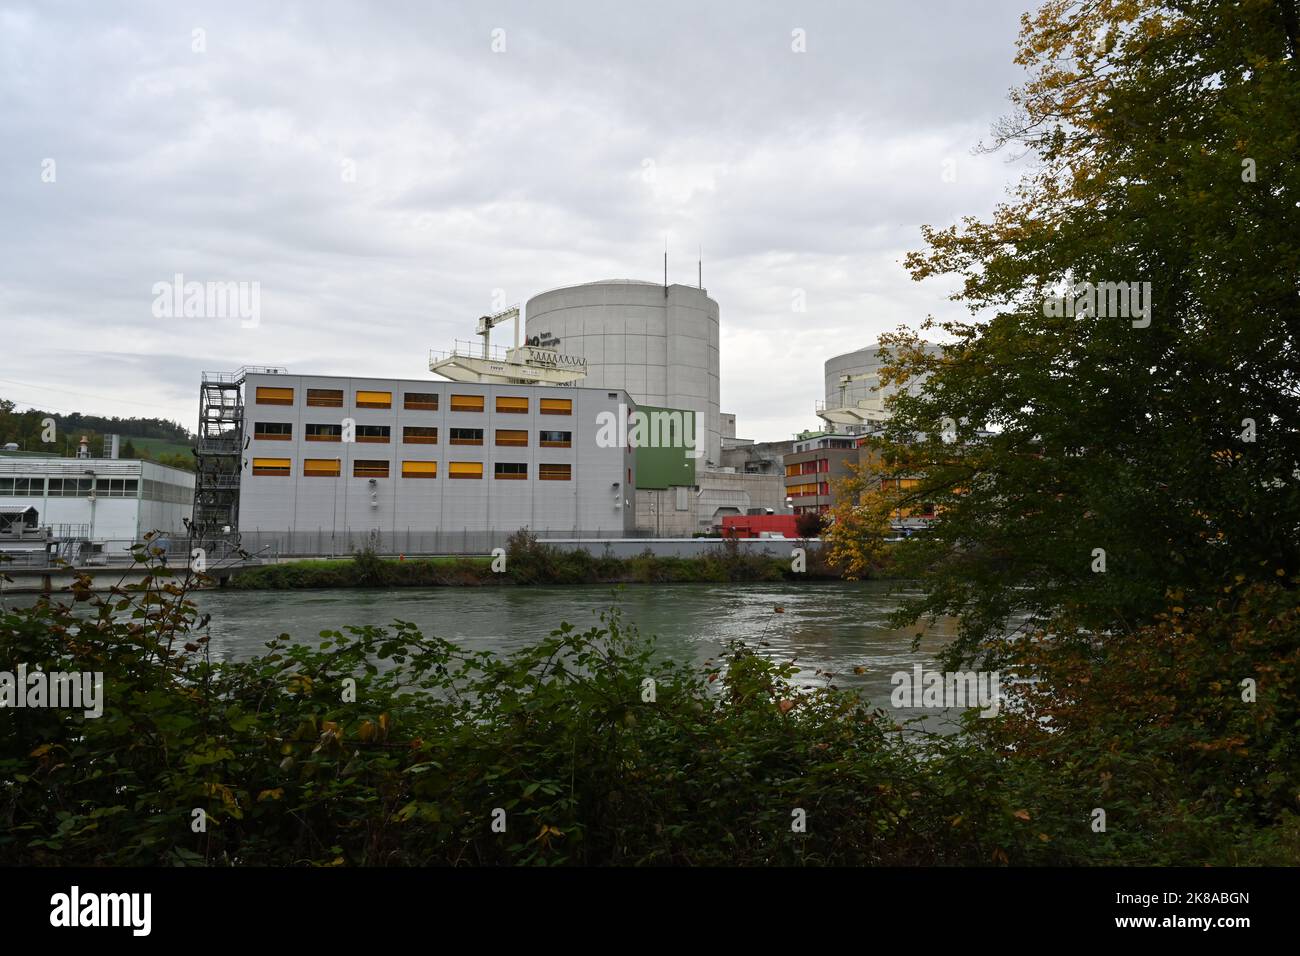 View on buildings of the nuclear power plant Beznau, owned by Axpo, from the bank of river Aare. Stock Photo